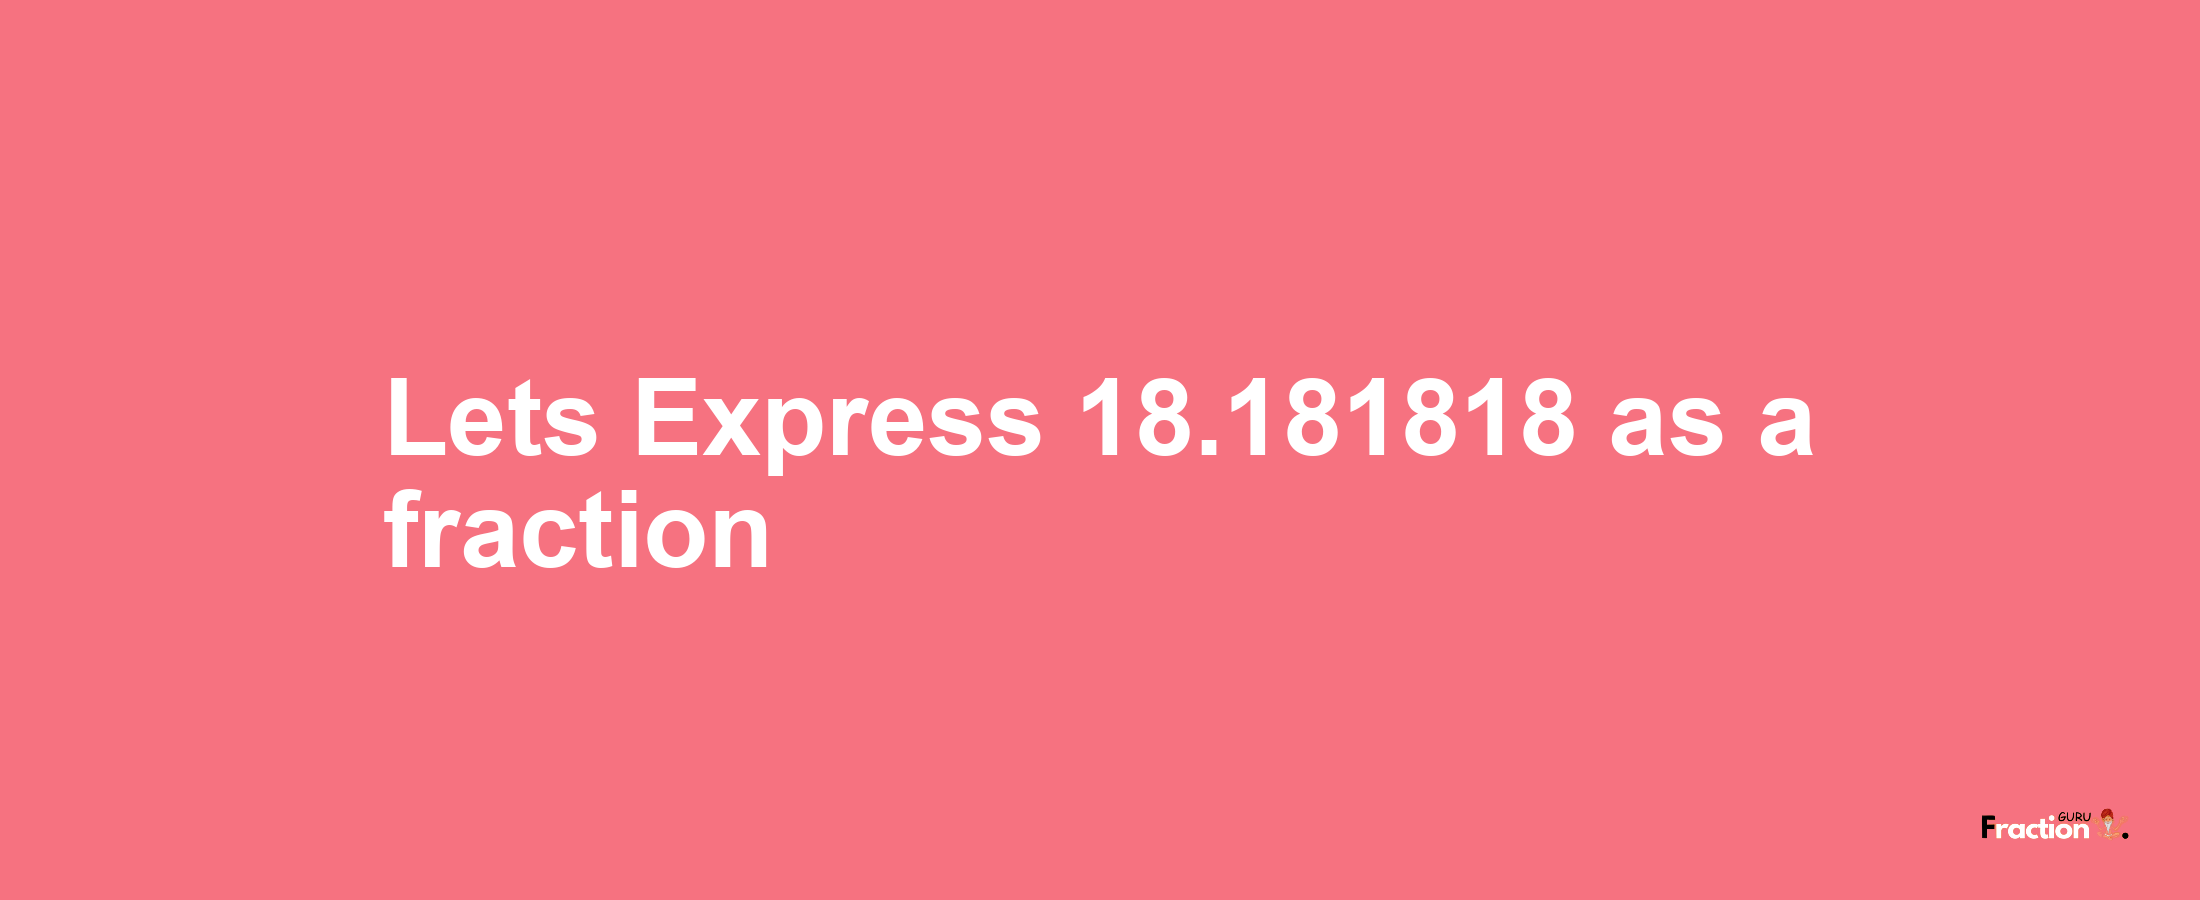 Lets Express 18.181818 as afraction